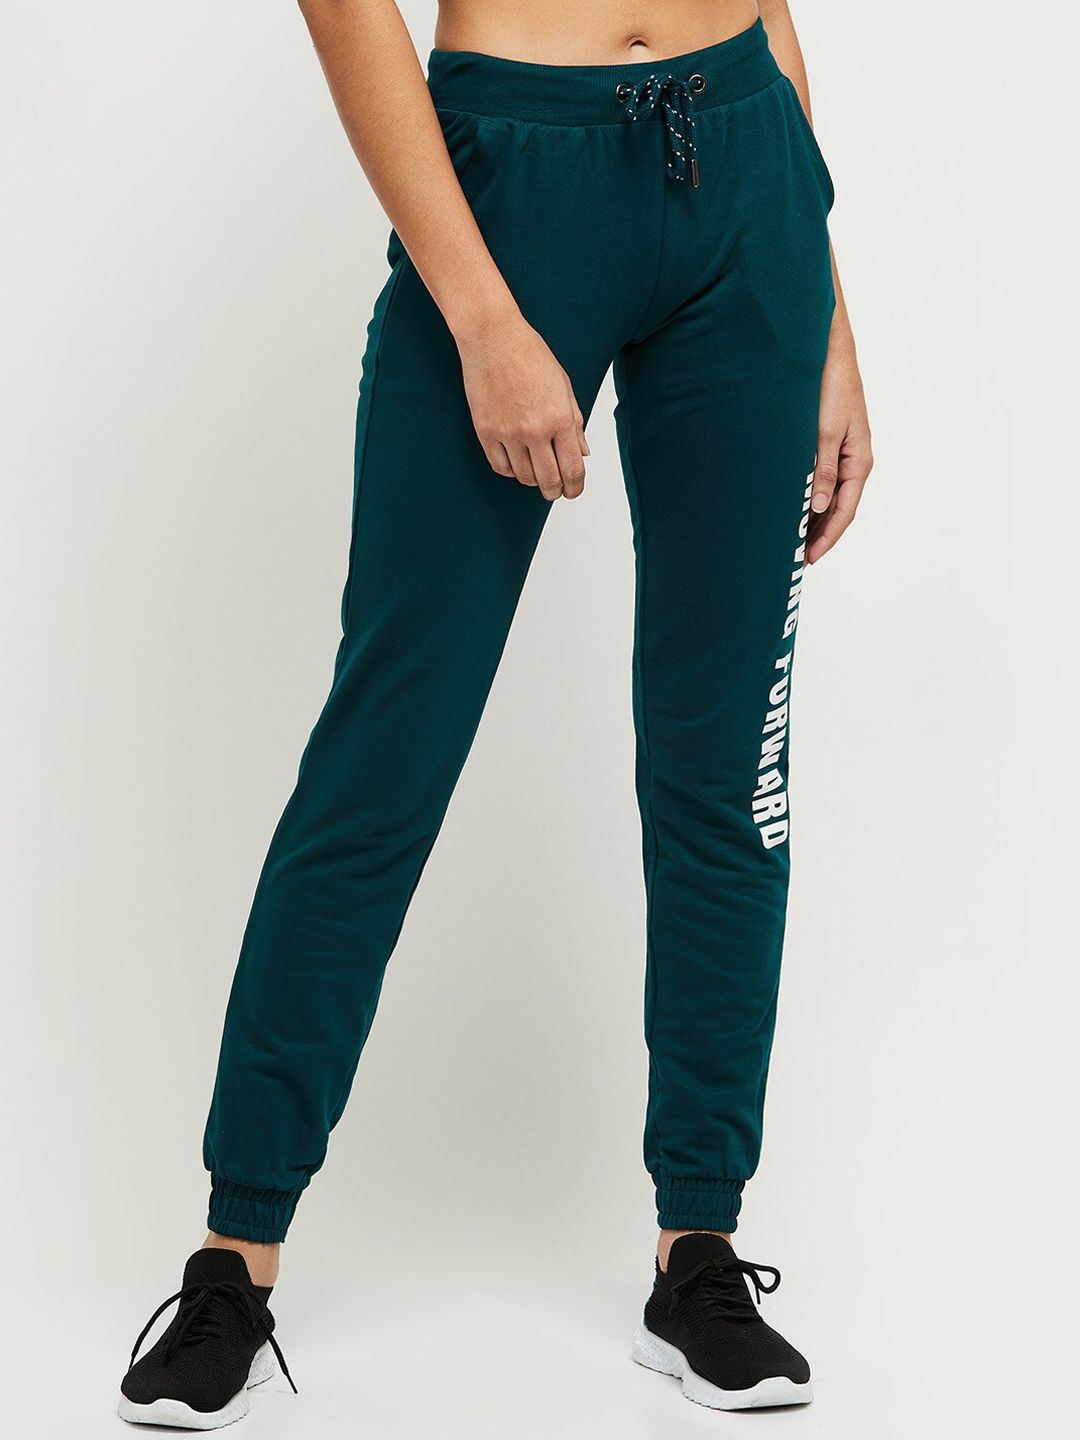 max Women Green Solid Track Pants Price in India